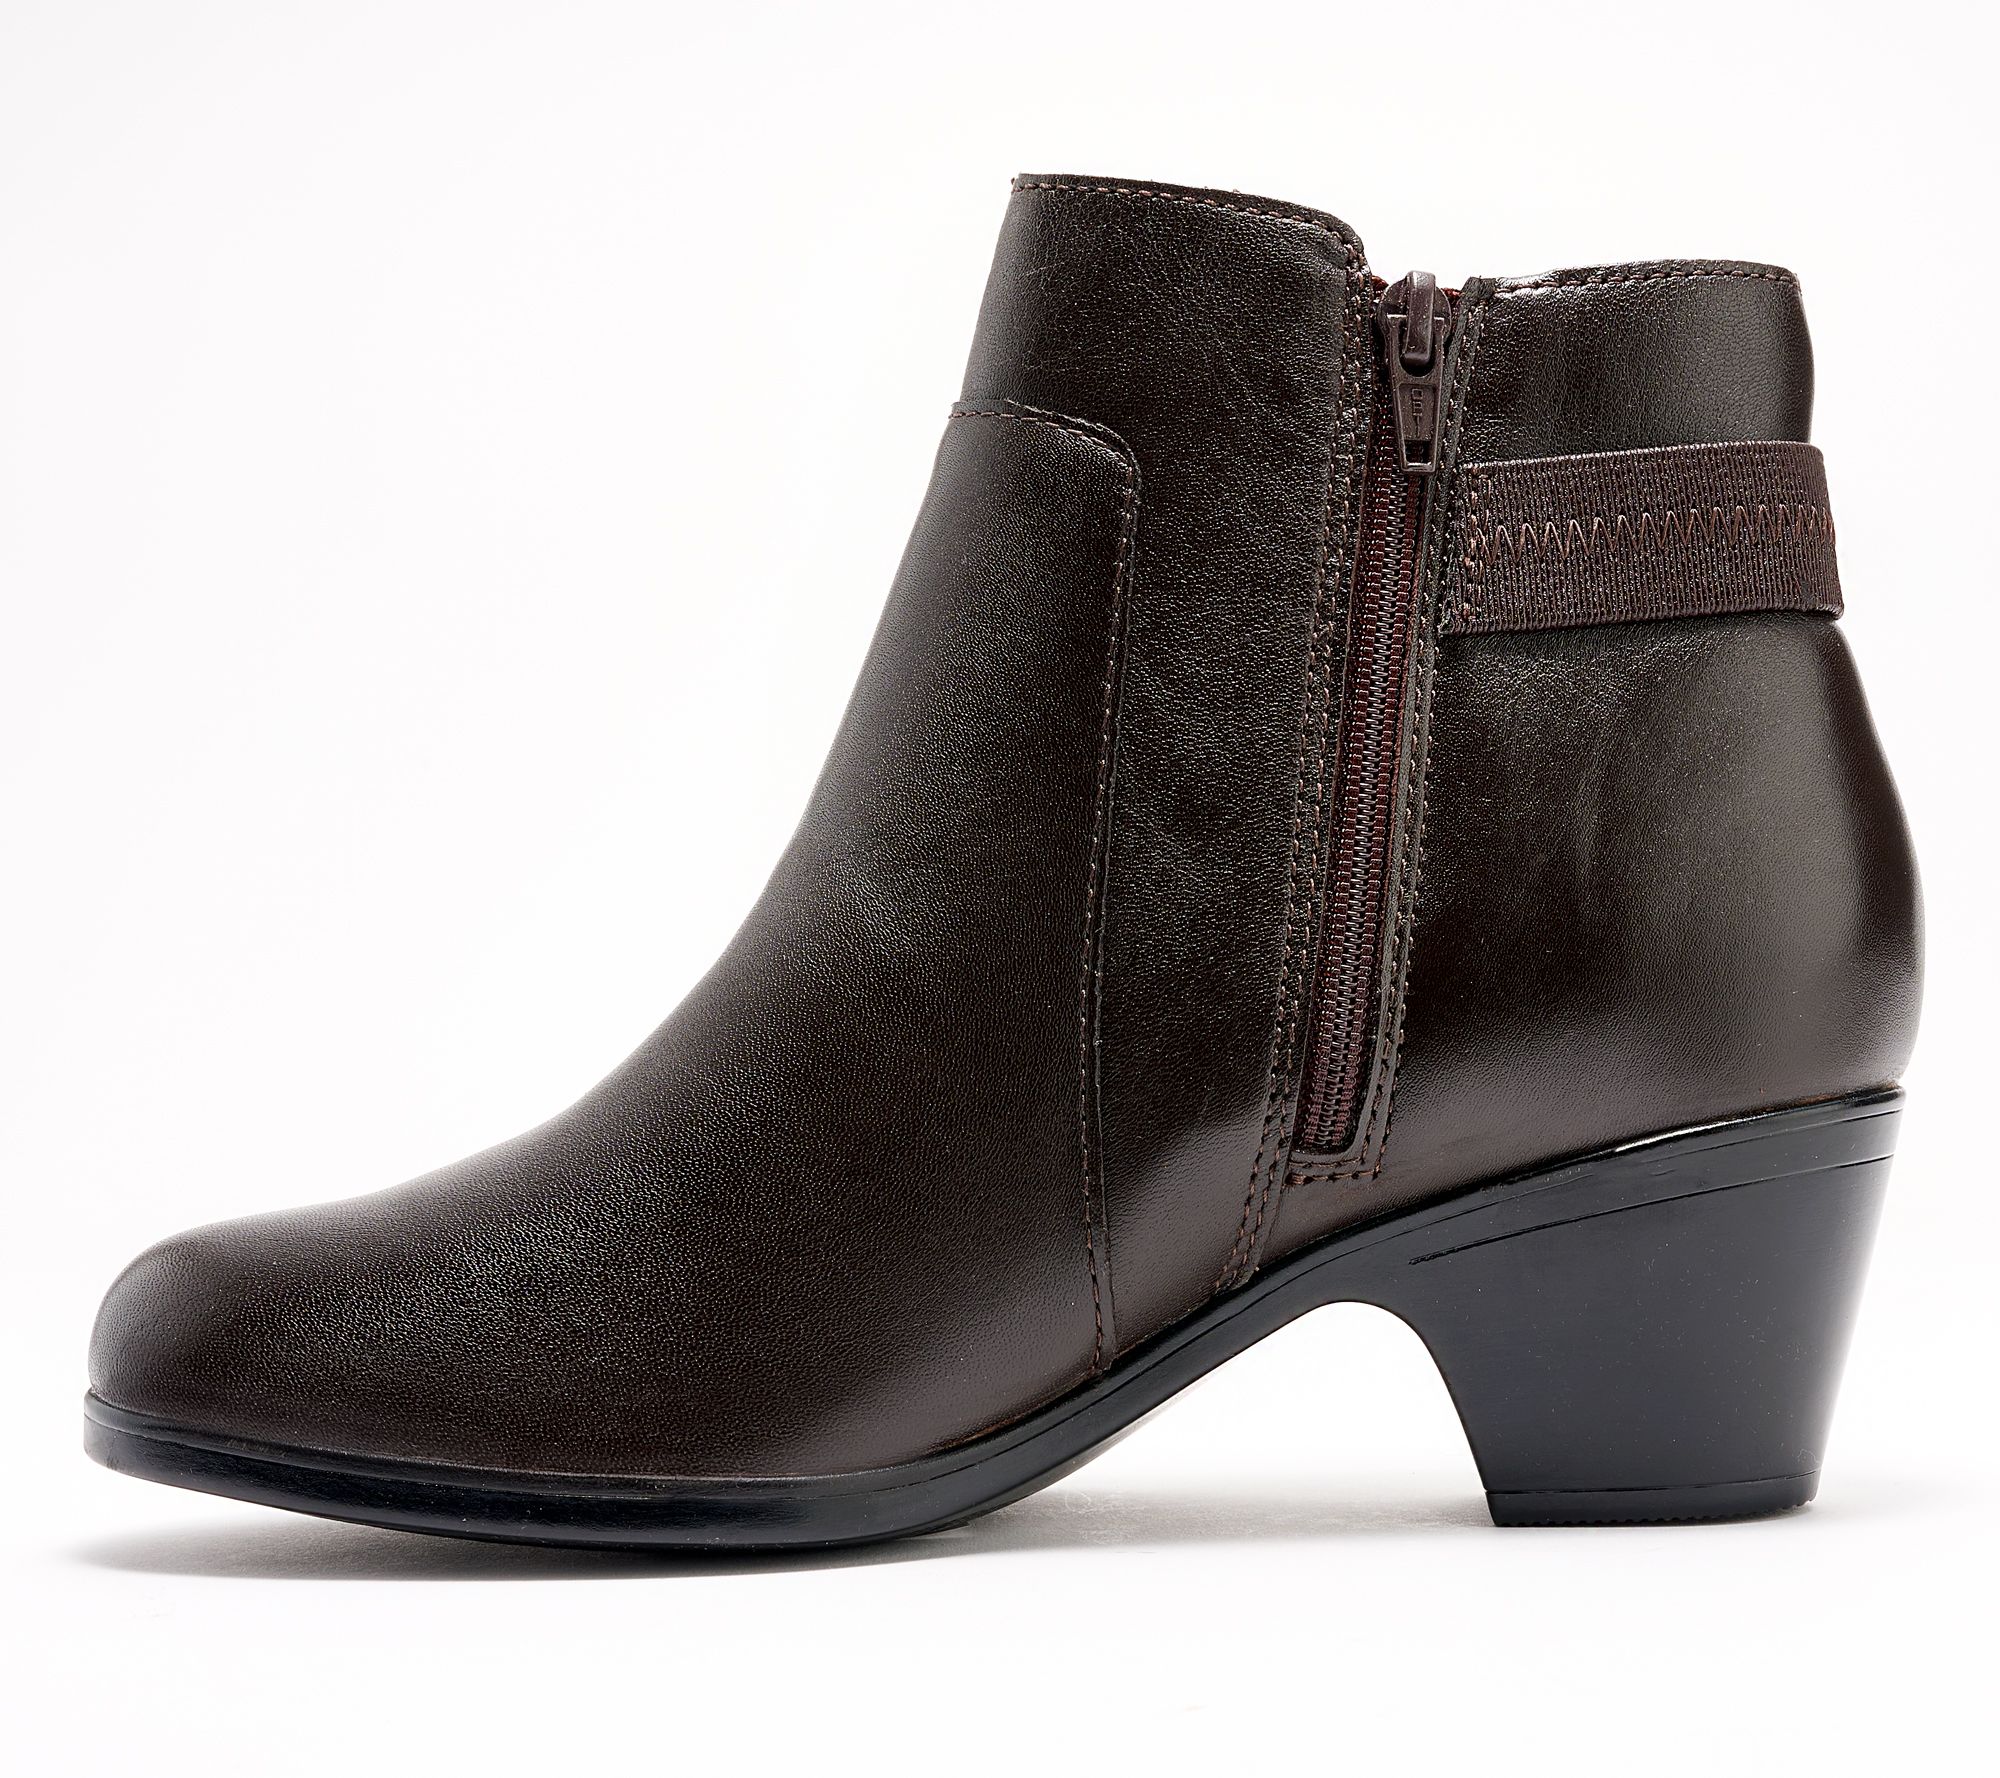 Clarks Collection Leather Heeled Booties- Emily2 Holly - QVC.com